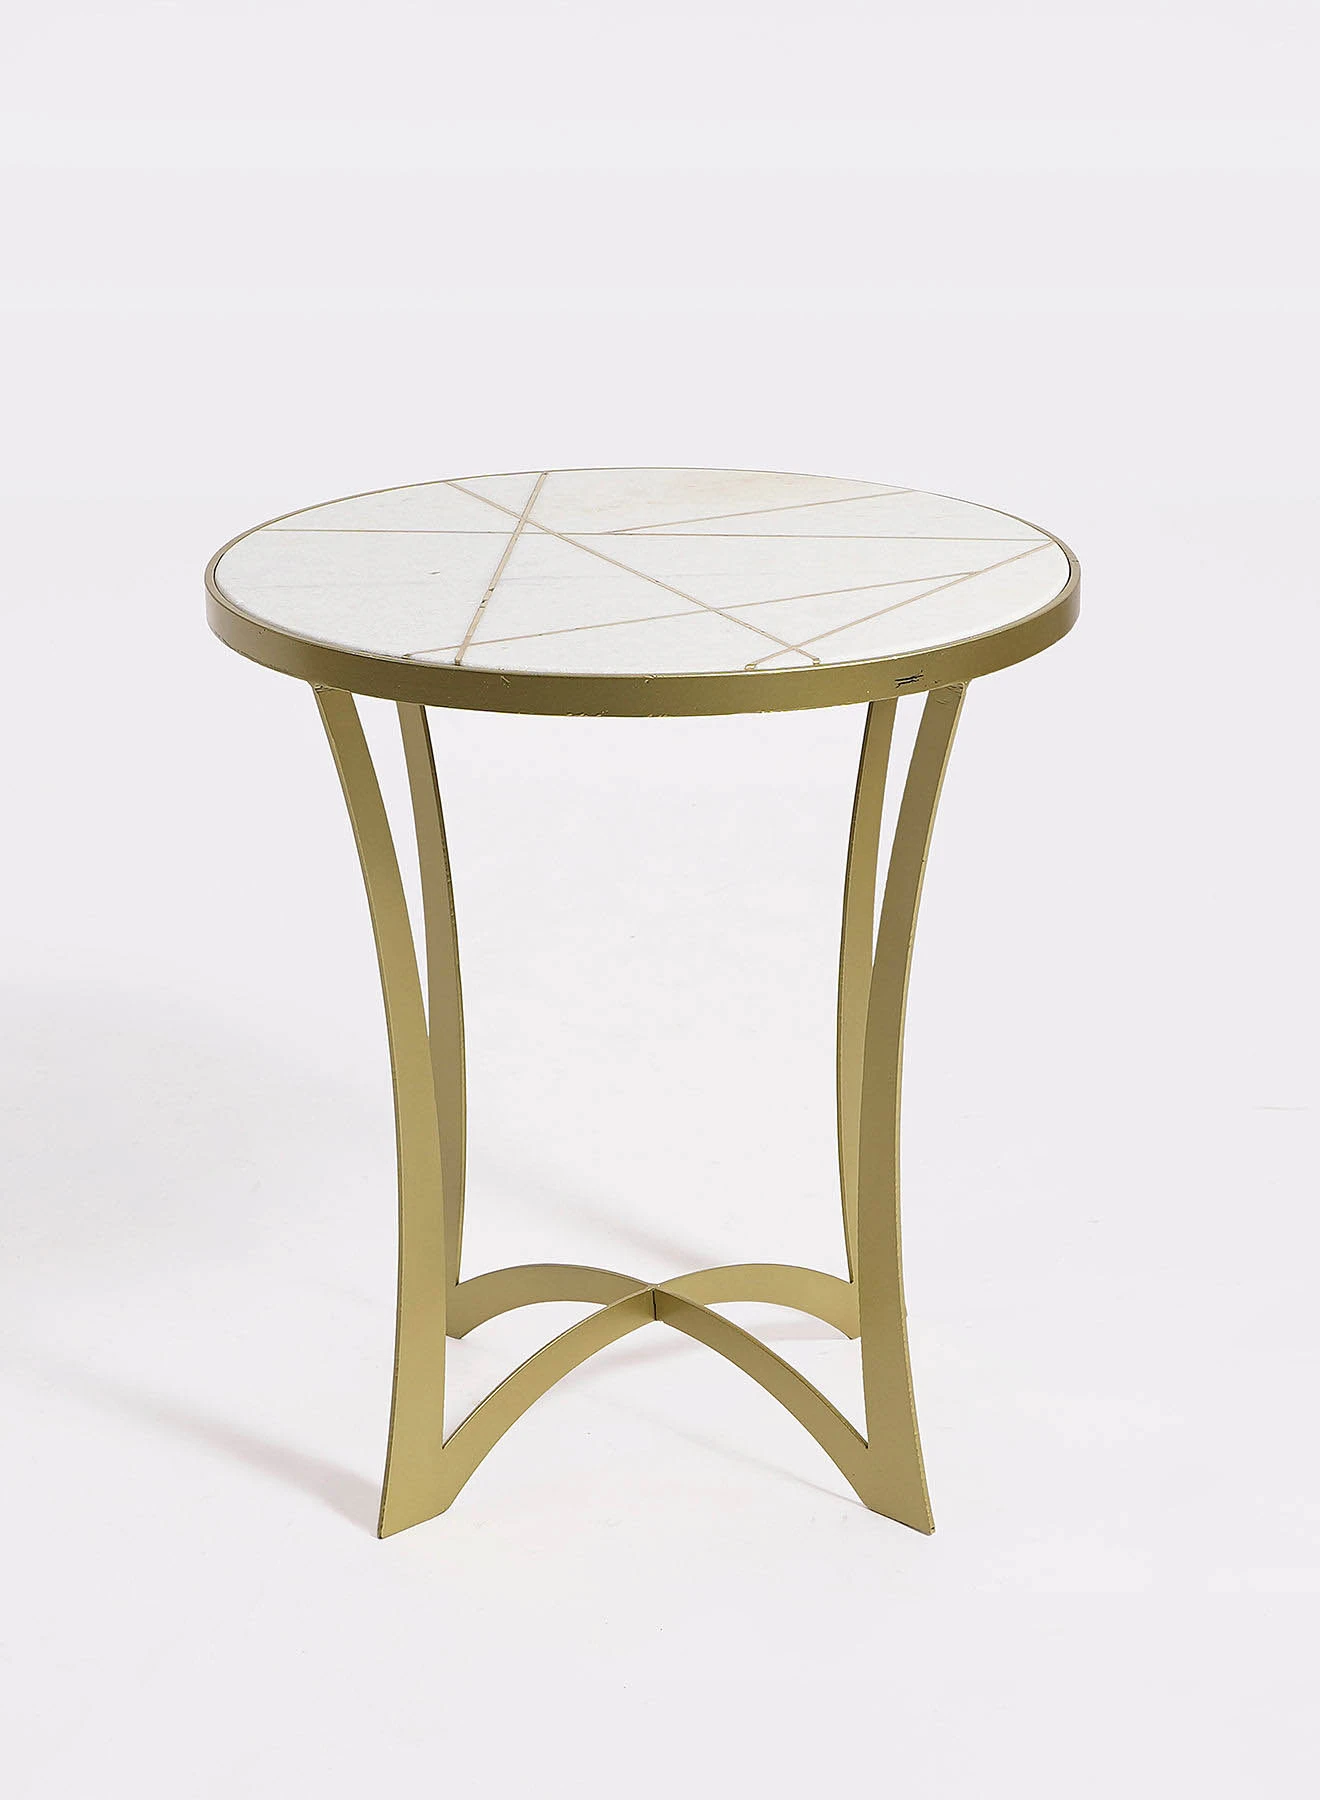 ebb & flow Side Table Luxurious - In Gold/White - Used Next To Sofa As Coffee Corner